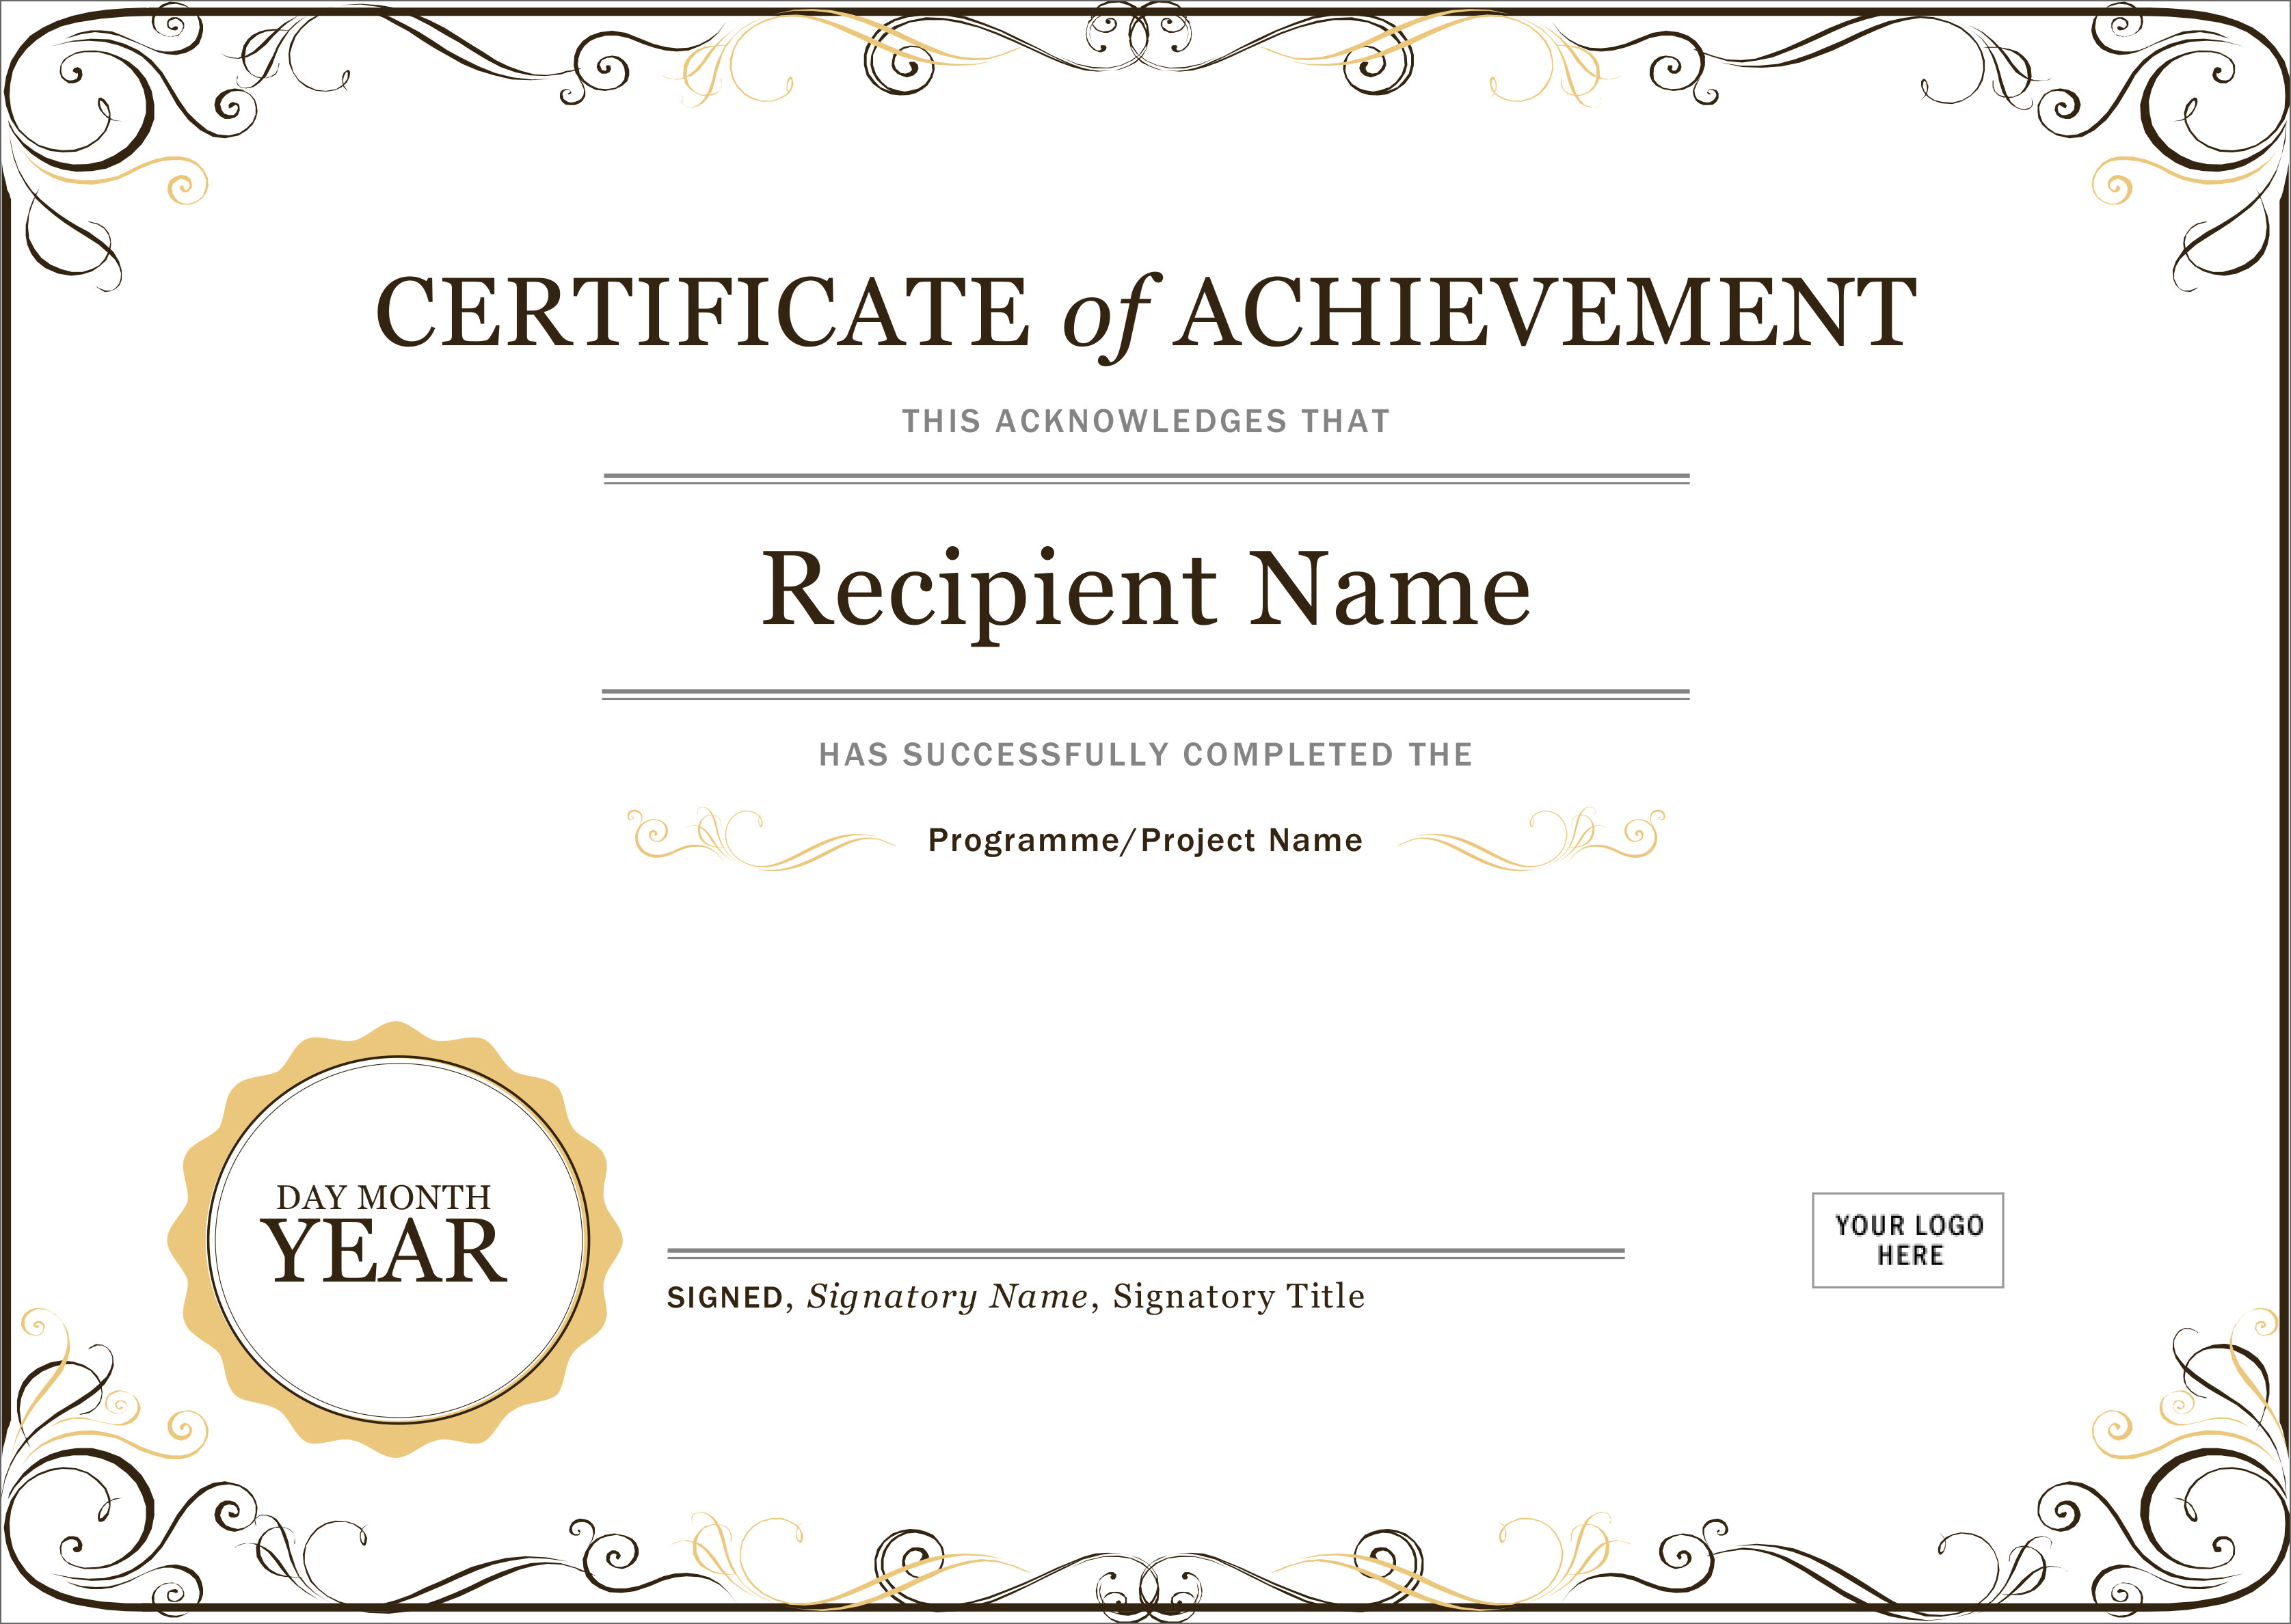 21 Free Creative Blank Certificate Templates In PSD Photoshop Regarding Free Funny Award Certificate Templates For Word